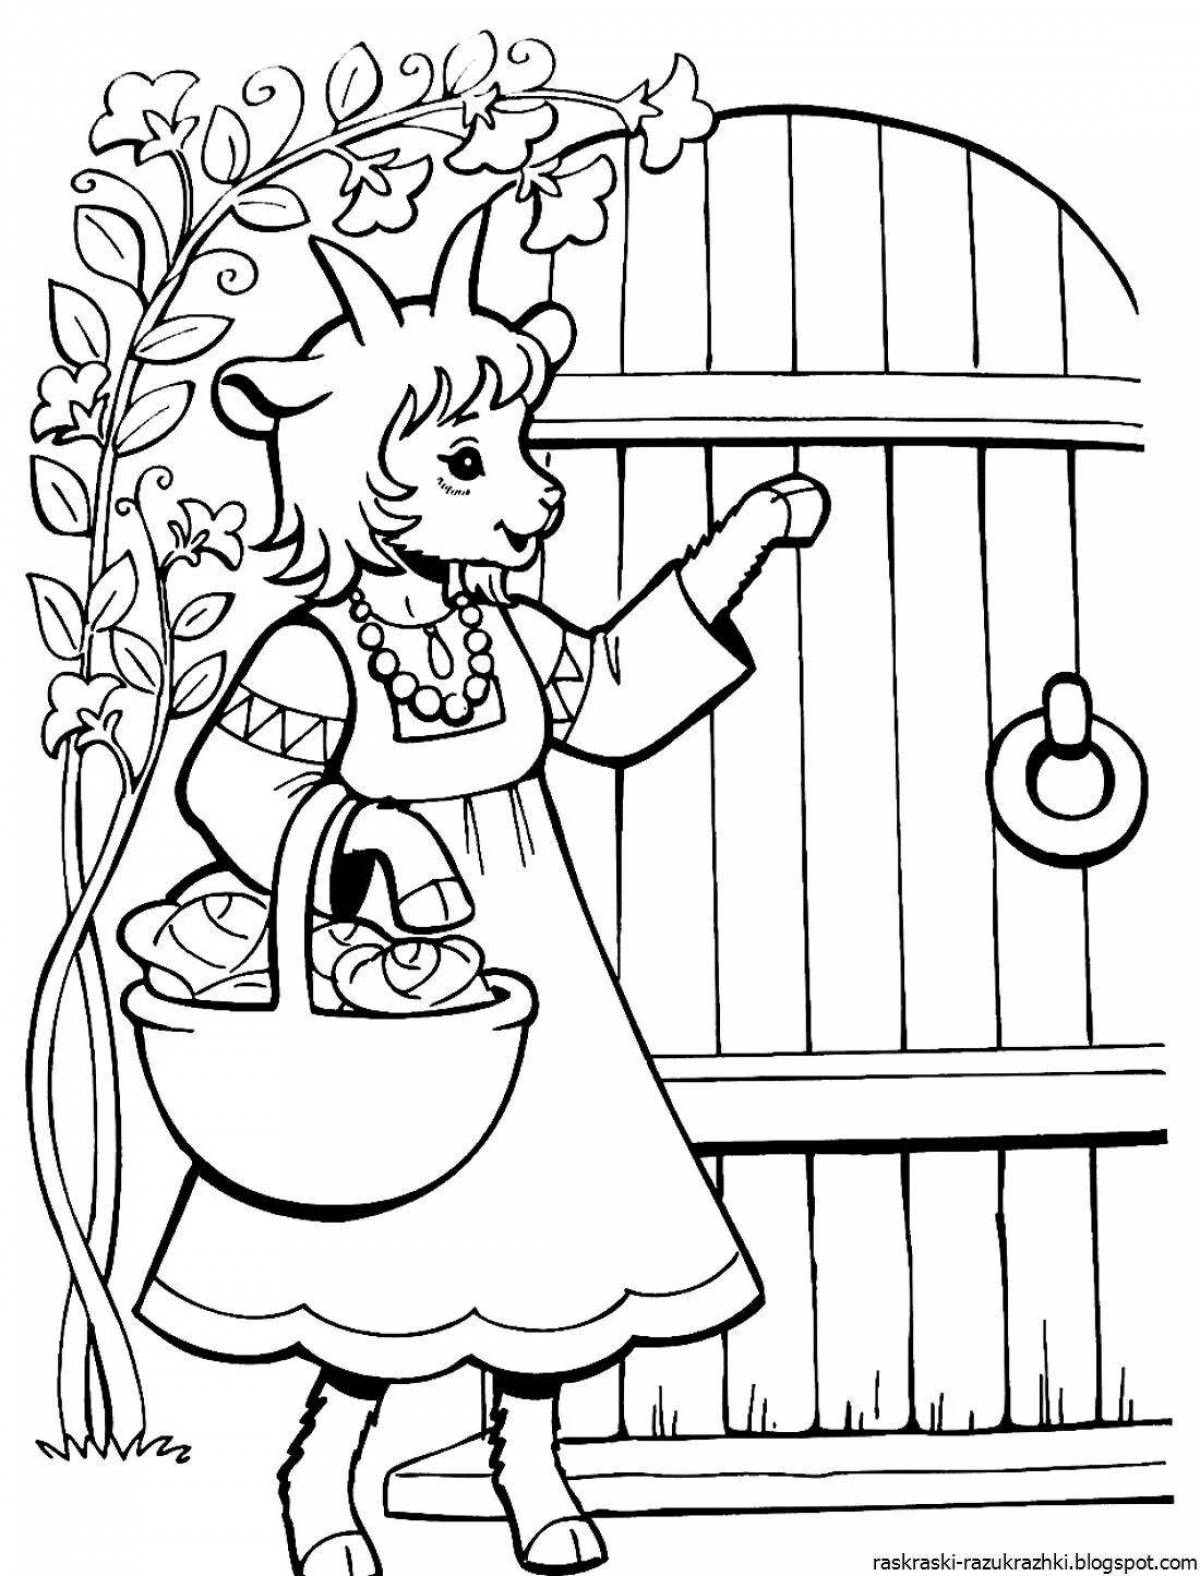 Violent coloring book heroes of fairy tales